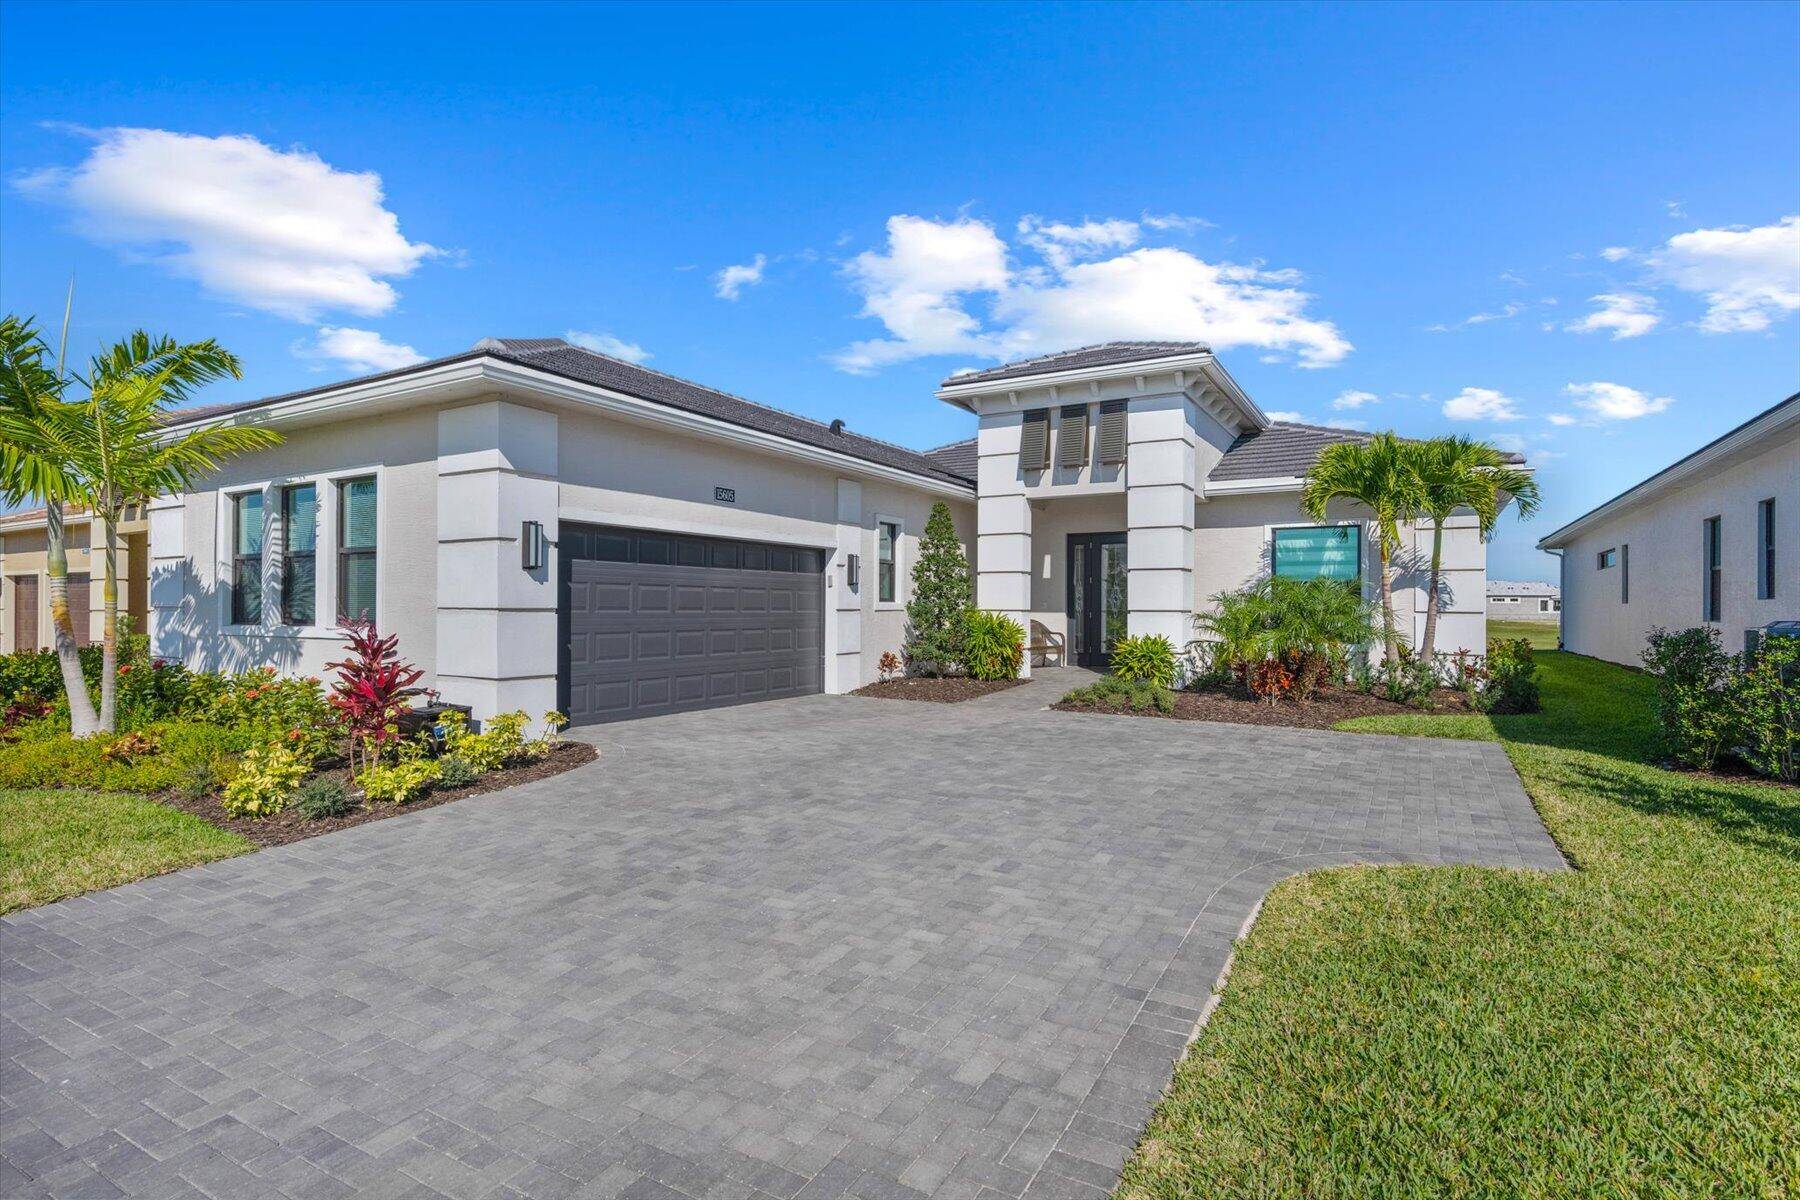 Nestled in the highly sought after community of Cresswind Palm Beach, Westlake's only active adult community, this stunning Rosemary model offers an exquisite blend of luxury and functionality.